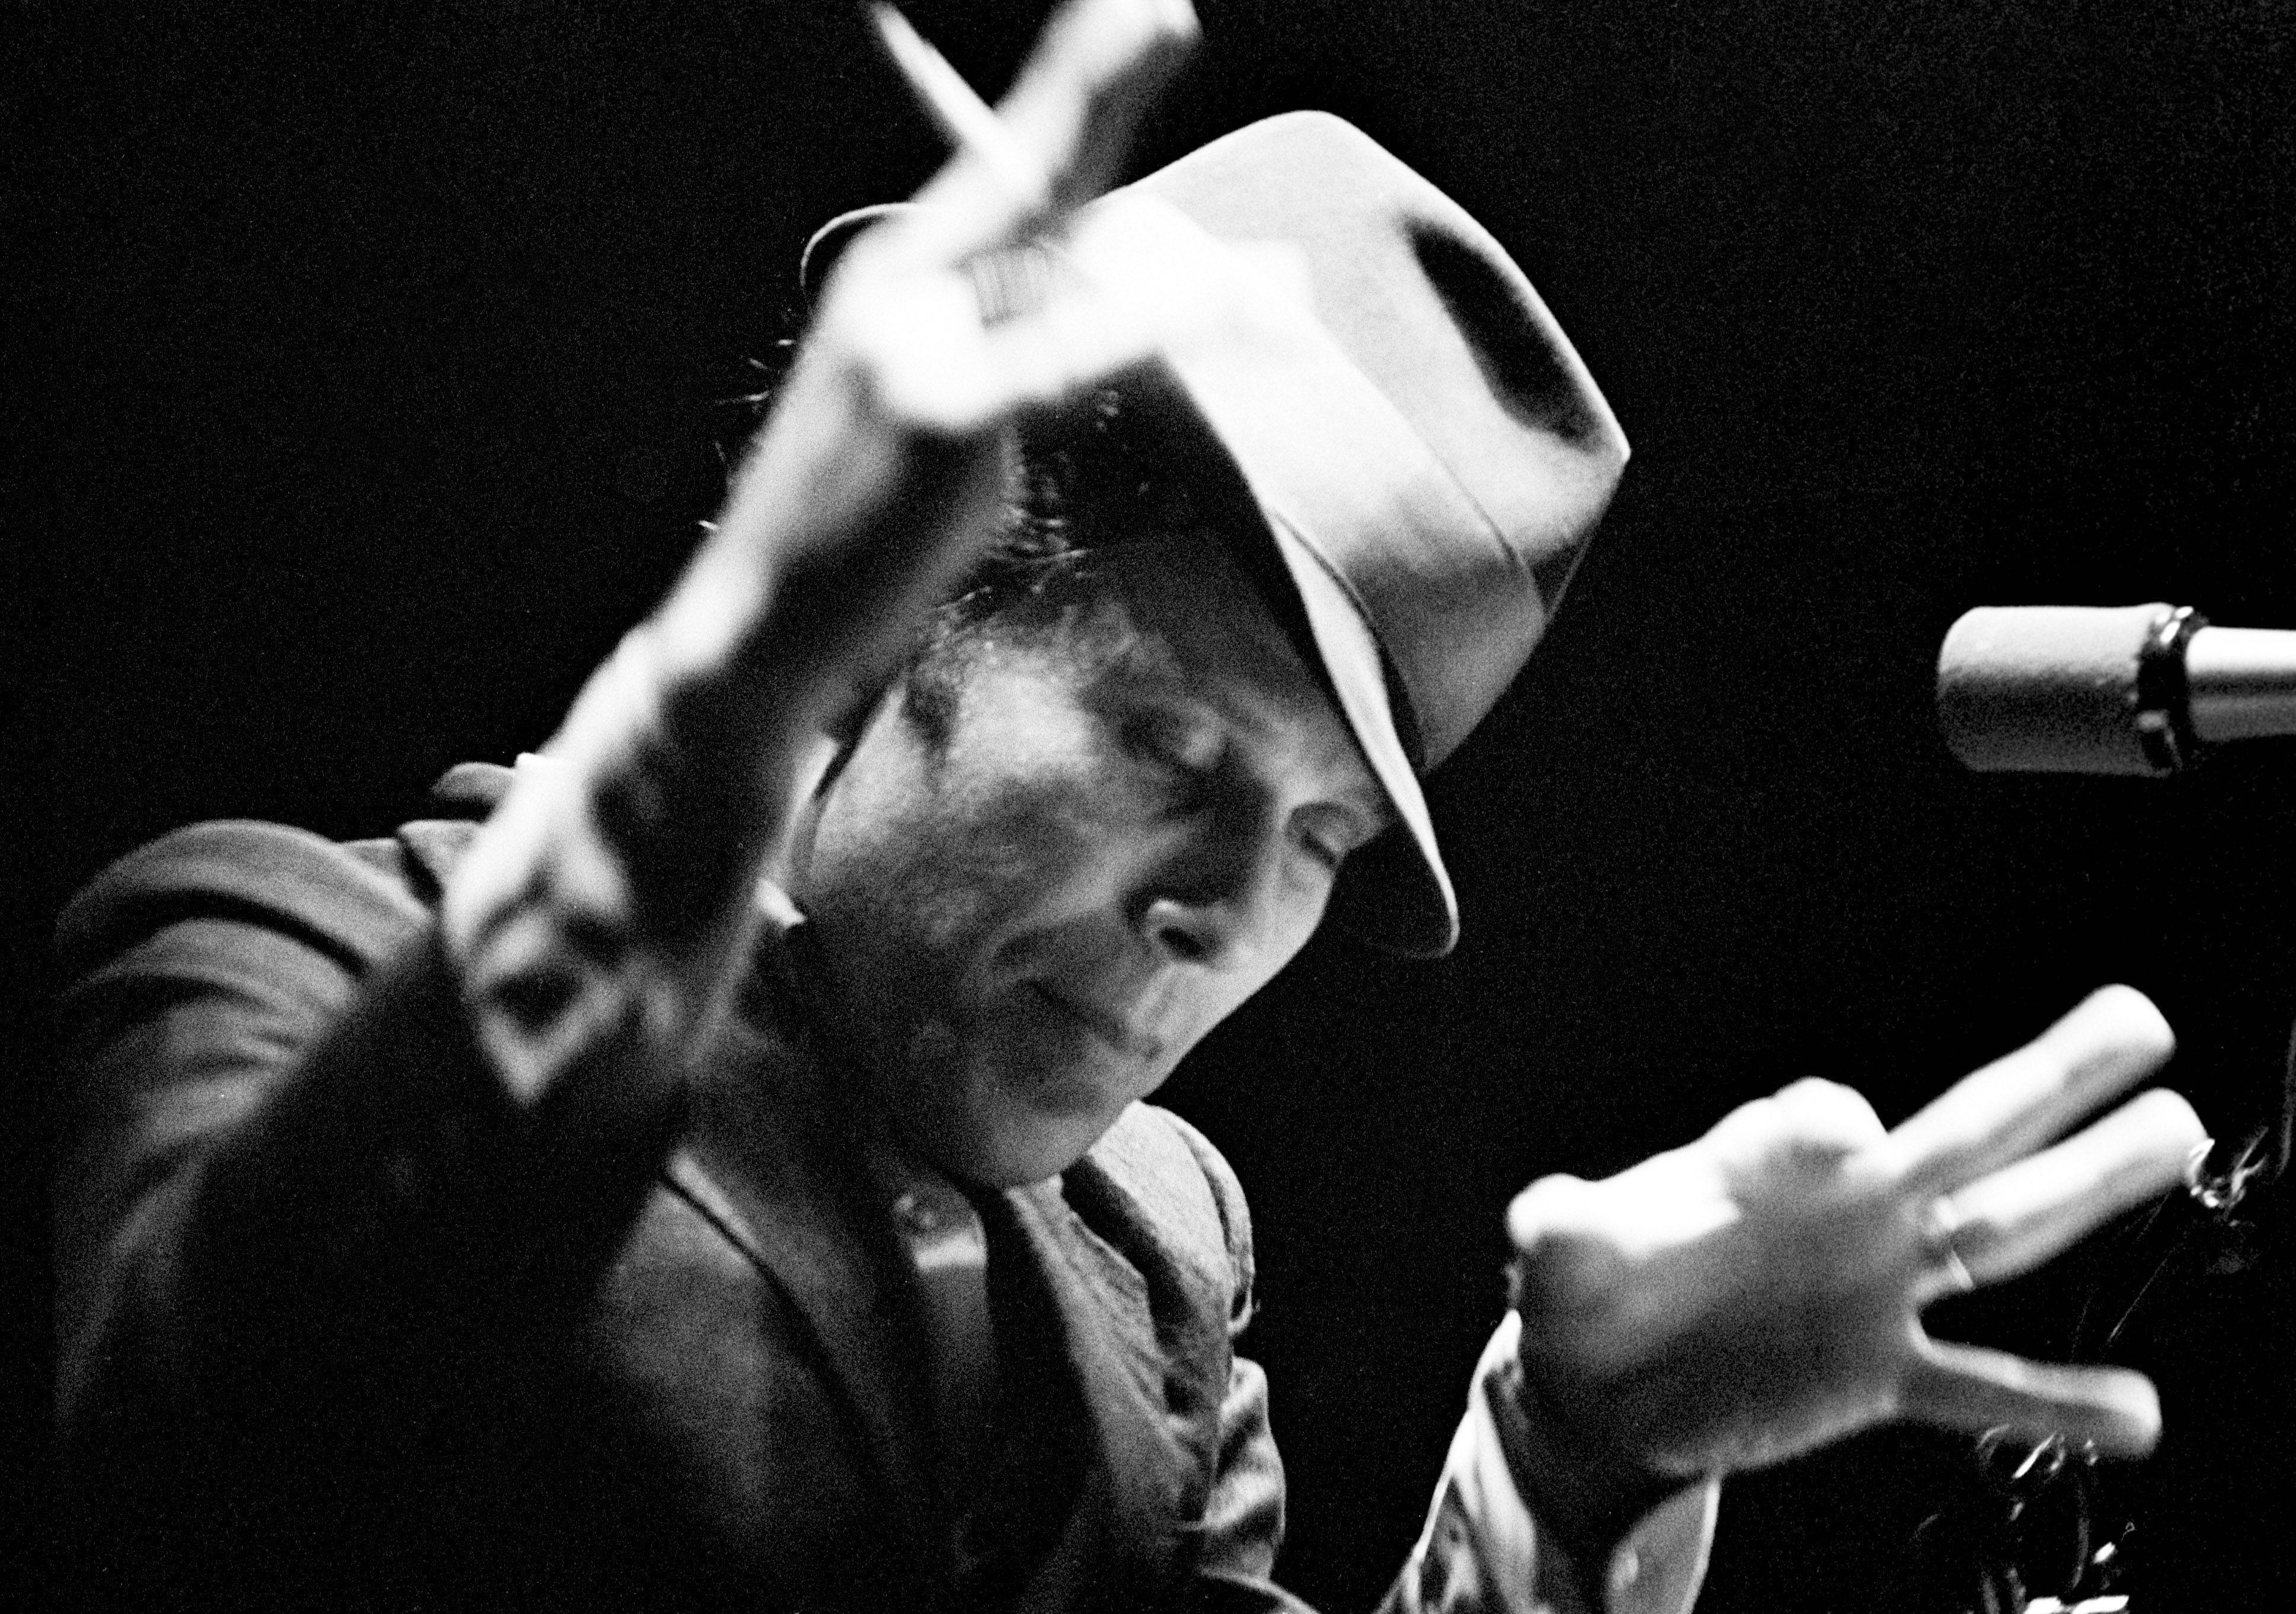 Tom Waits: Our 1985 Interview, <i></noscript>
<p><b>So, what’s your day like?</b><br />
Well, lately it’s been a little easier. I get up at about 7 o’clock with the baby and I get the Rice Krispies going and the french toast, then I put on Mr. Rogers.</p>
<p><b>How old is the baby?</b><br />
Two.</p>
<p><b>Does the baby watch Mr. Rogers or do you?</b><br />
I watch it and I make her watch it with me. I do subtitles. I do a Fourteenth Street version of <i>Mr. Rogers’ Neighborhood</i> where everybody’s out of work and selling drugs on the corner. When I was a kid the show was Sheriff John. He was a policeman. That’s who I was forced to get to know.</p>
<p><b>In New York we had Office Joe Bolton, an Irish cop; he was the host of the Three Stooges show, which, I guess, was supposed to keep a lid on the knucklehead behavior. What’s you baby’s name?</b><br />
Well, we haven’t picked a name yet. I told her that when she’s 18 she can pick any name she wants. In the meantime, we’ll call her something different every day.</p>
<p><b>What is she today?</b><br />
Max today. She’s been everything. We just can’t seem to make up our minds. When she meets somebody and likes them she takes their name. She speaks 17 languages . She’s now in military school in Connecticut. I only get to see her on weekends. At night when I get home all the kids line up in their uniforms and Joe Bob’s got my martini and Max has my slippers and Roosevel has my pipe. They all said “Hello, Daddy!”</p>
<p><b>So what happens after Mr. Rogers?</b><br />
Well, I usually go to sleep under the table somewhere. Every day is different. I go over to the seminary on Tenth Avenue a lot. For a couple of hours. Just to relax. It reminds me of Illinois. I’ve been doing the record for months, so I just got a break. I was getting two or three hours of sleep every couple of months.</p>
<p><b>Did you record in the daytime?</b><br />
Yeah, from about 10 in the morning. I was working in midtown. I had to fight all the traffic and all the other commuters. the hardest thing was just getting to the studio. After that I was alright.</p>
<p><b>This album has really a lot of songs on it.</b><br />
Nineteen. Everybody says that’s too many.</p>
<p><b>Did you record others that didn’t make it on the record?</b><br />
Yeah, I did about 25 all together. There’s a religious song that didn’t get on the album. It’s called “Bethlehem, Pa.” it’s about a guy named Bob Christ. There were a couple of others.</p>
<p><b>What happens to those?</b><br />
They’re orphans. They’re on their own.</p>
<p><b>I’m really interested in the songs that don’t make it onto albums.</b><br />
I end up dismantling them. It’s just like having a car that doesn’t run. You just use it for parts. “The rest of the guys are gonna have to go out there now and bring Dad home some money. So all of you guys go out there and stick together. Bob, you look out for your younger brother there. And all of you go out there into the world of radio and performance value.” I feel like Fagin.</p>
<p>It took a long time to record this album, two and a half months. The recording process has a peak, and then it dissipates. You have to be careful that it doesn’t go on too long. Then you start to unravel everything.</p>
<p>Nowadays, if you want a certain sound you don’t have to get it now, you can get it later. When you’re mixing, electronically. I wanted to get it now, so I feel like I cooked it and I ate it. You can establish percussion sounds later electronically. But I ended up banging on things so I felt that it really responded. If I couldn’t get the right sound out of the drum set we’d get a chest of drawers in the bathroom and hit it real hard with a two-by-four. Things like that. That’s on “Singapore.” Those little things made me feel more involved than sampling on a synthesizer.</p>
<img src=